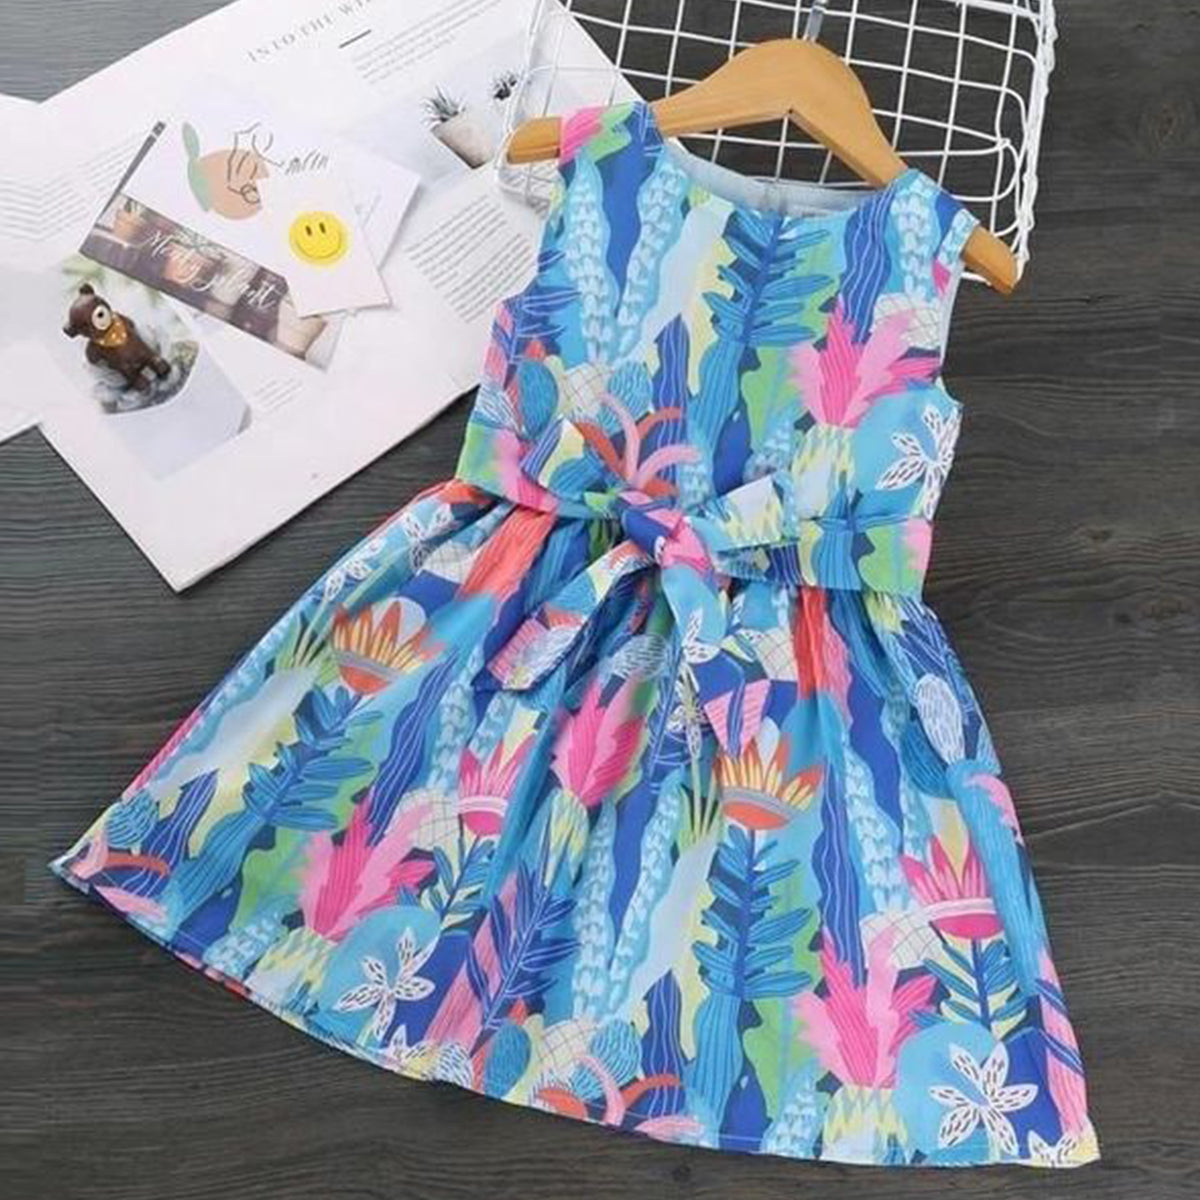 Share more than 231 cotton dresses for girls super hot